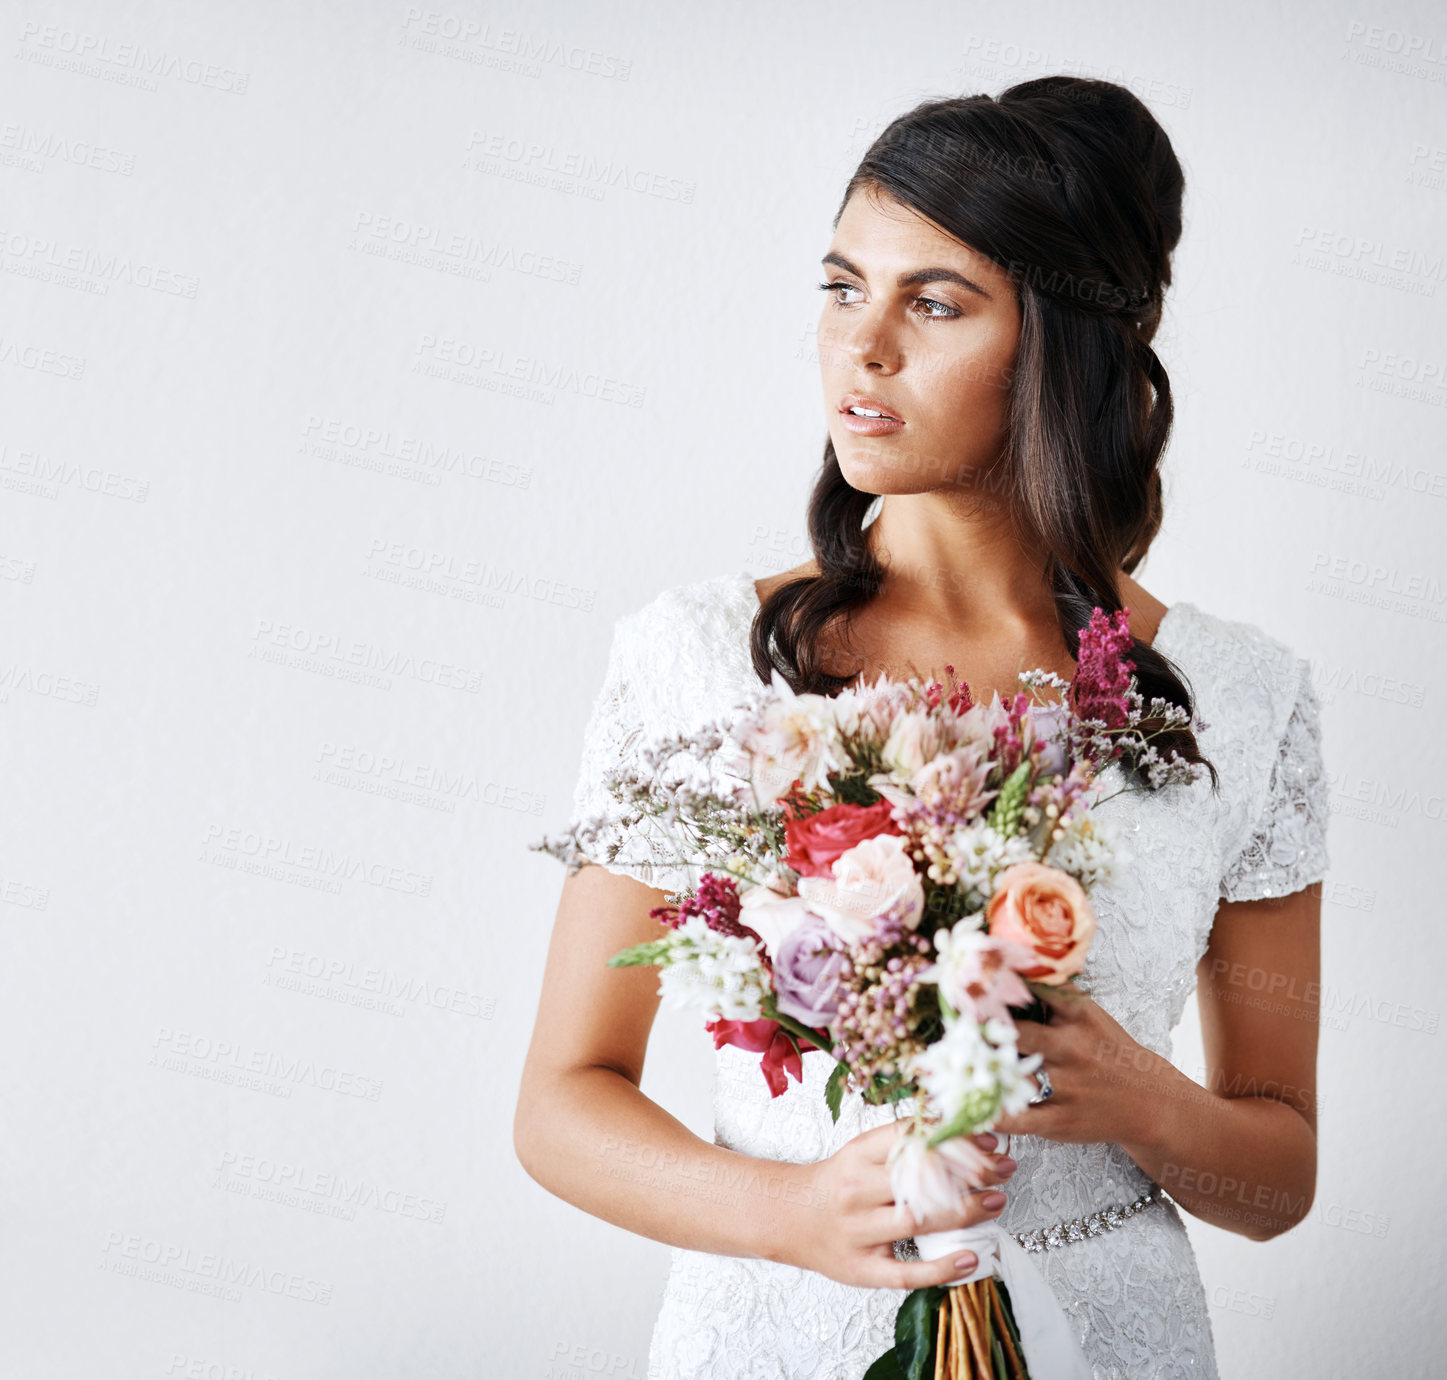 Buy stock photo Studio portrait of a young bride holding a bunch of flowers against a gray background